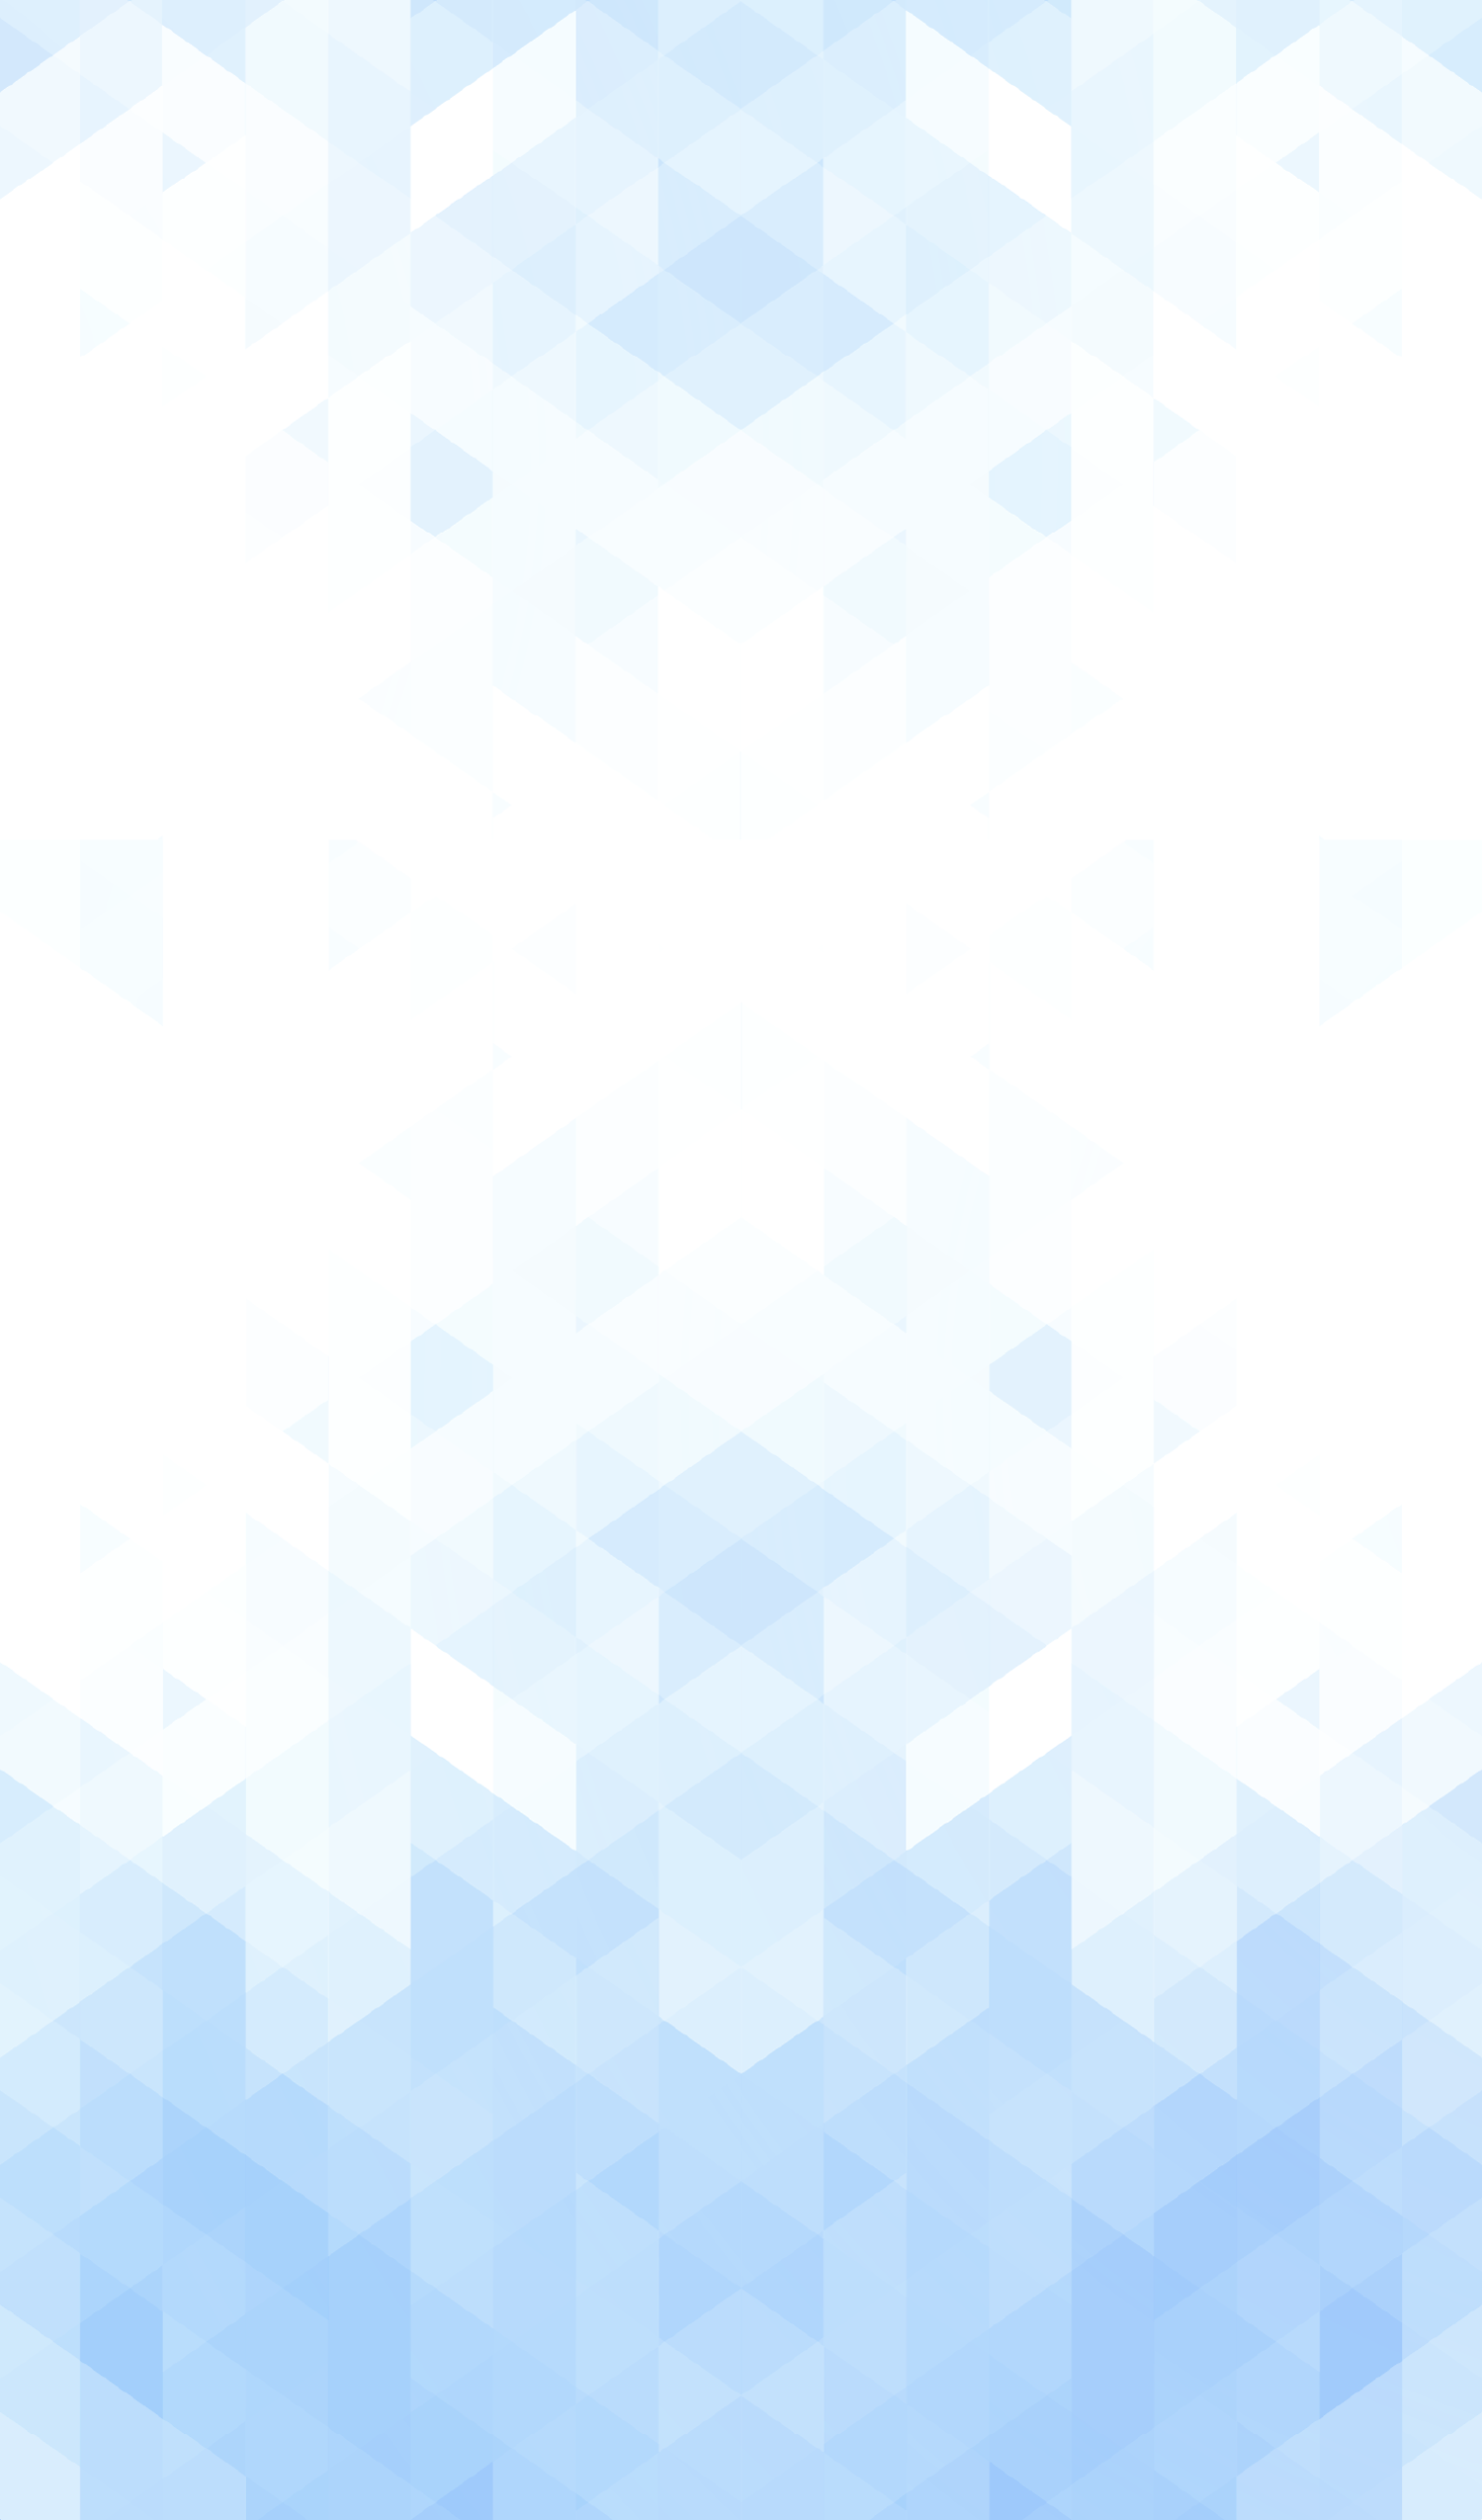 Vertical abstract white background with blue gradient shapes